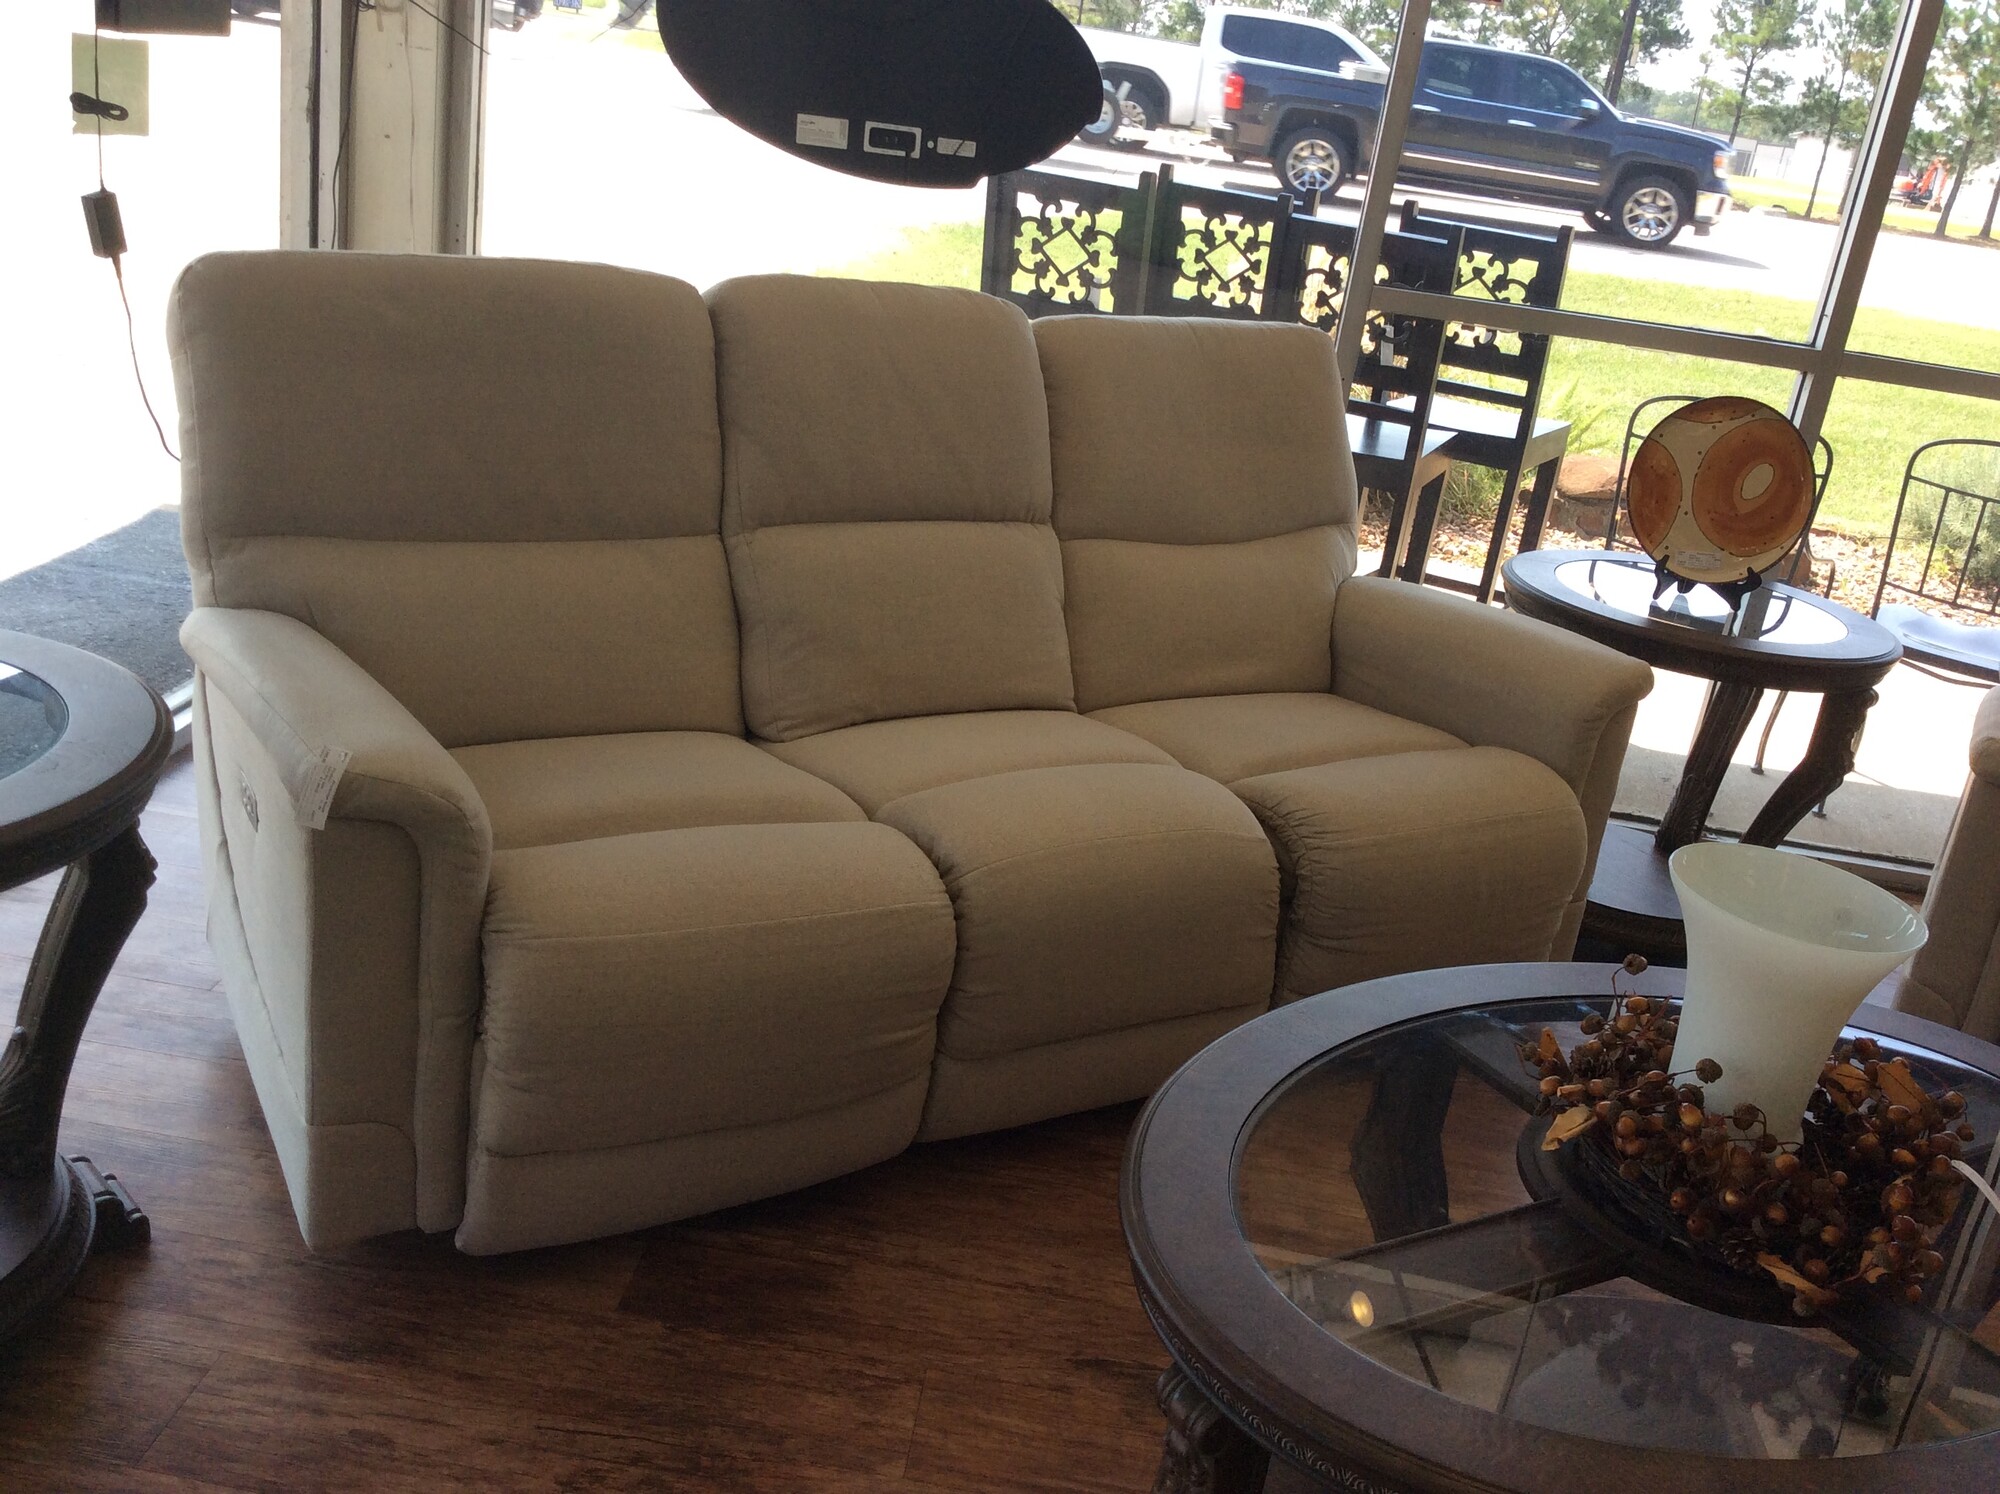 This is a 3 seater,cream, reclining Lazy Boy Sofa.